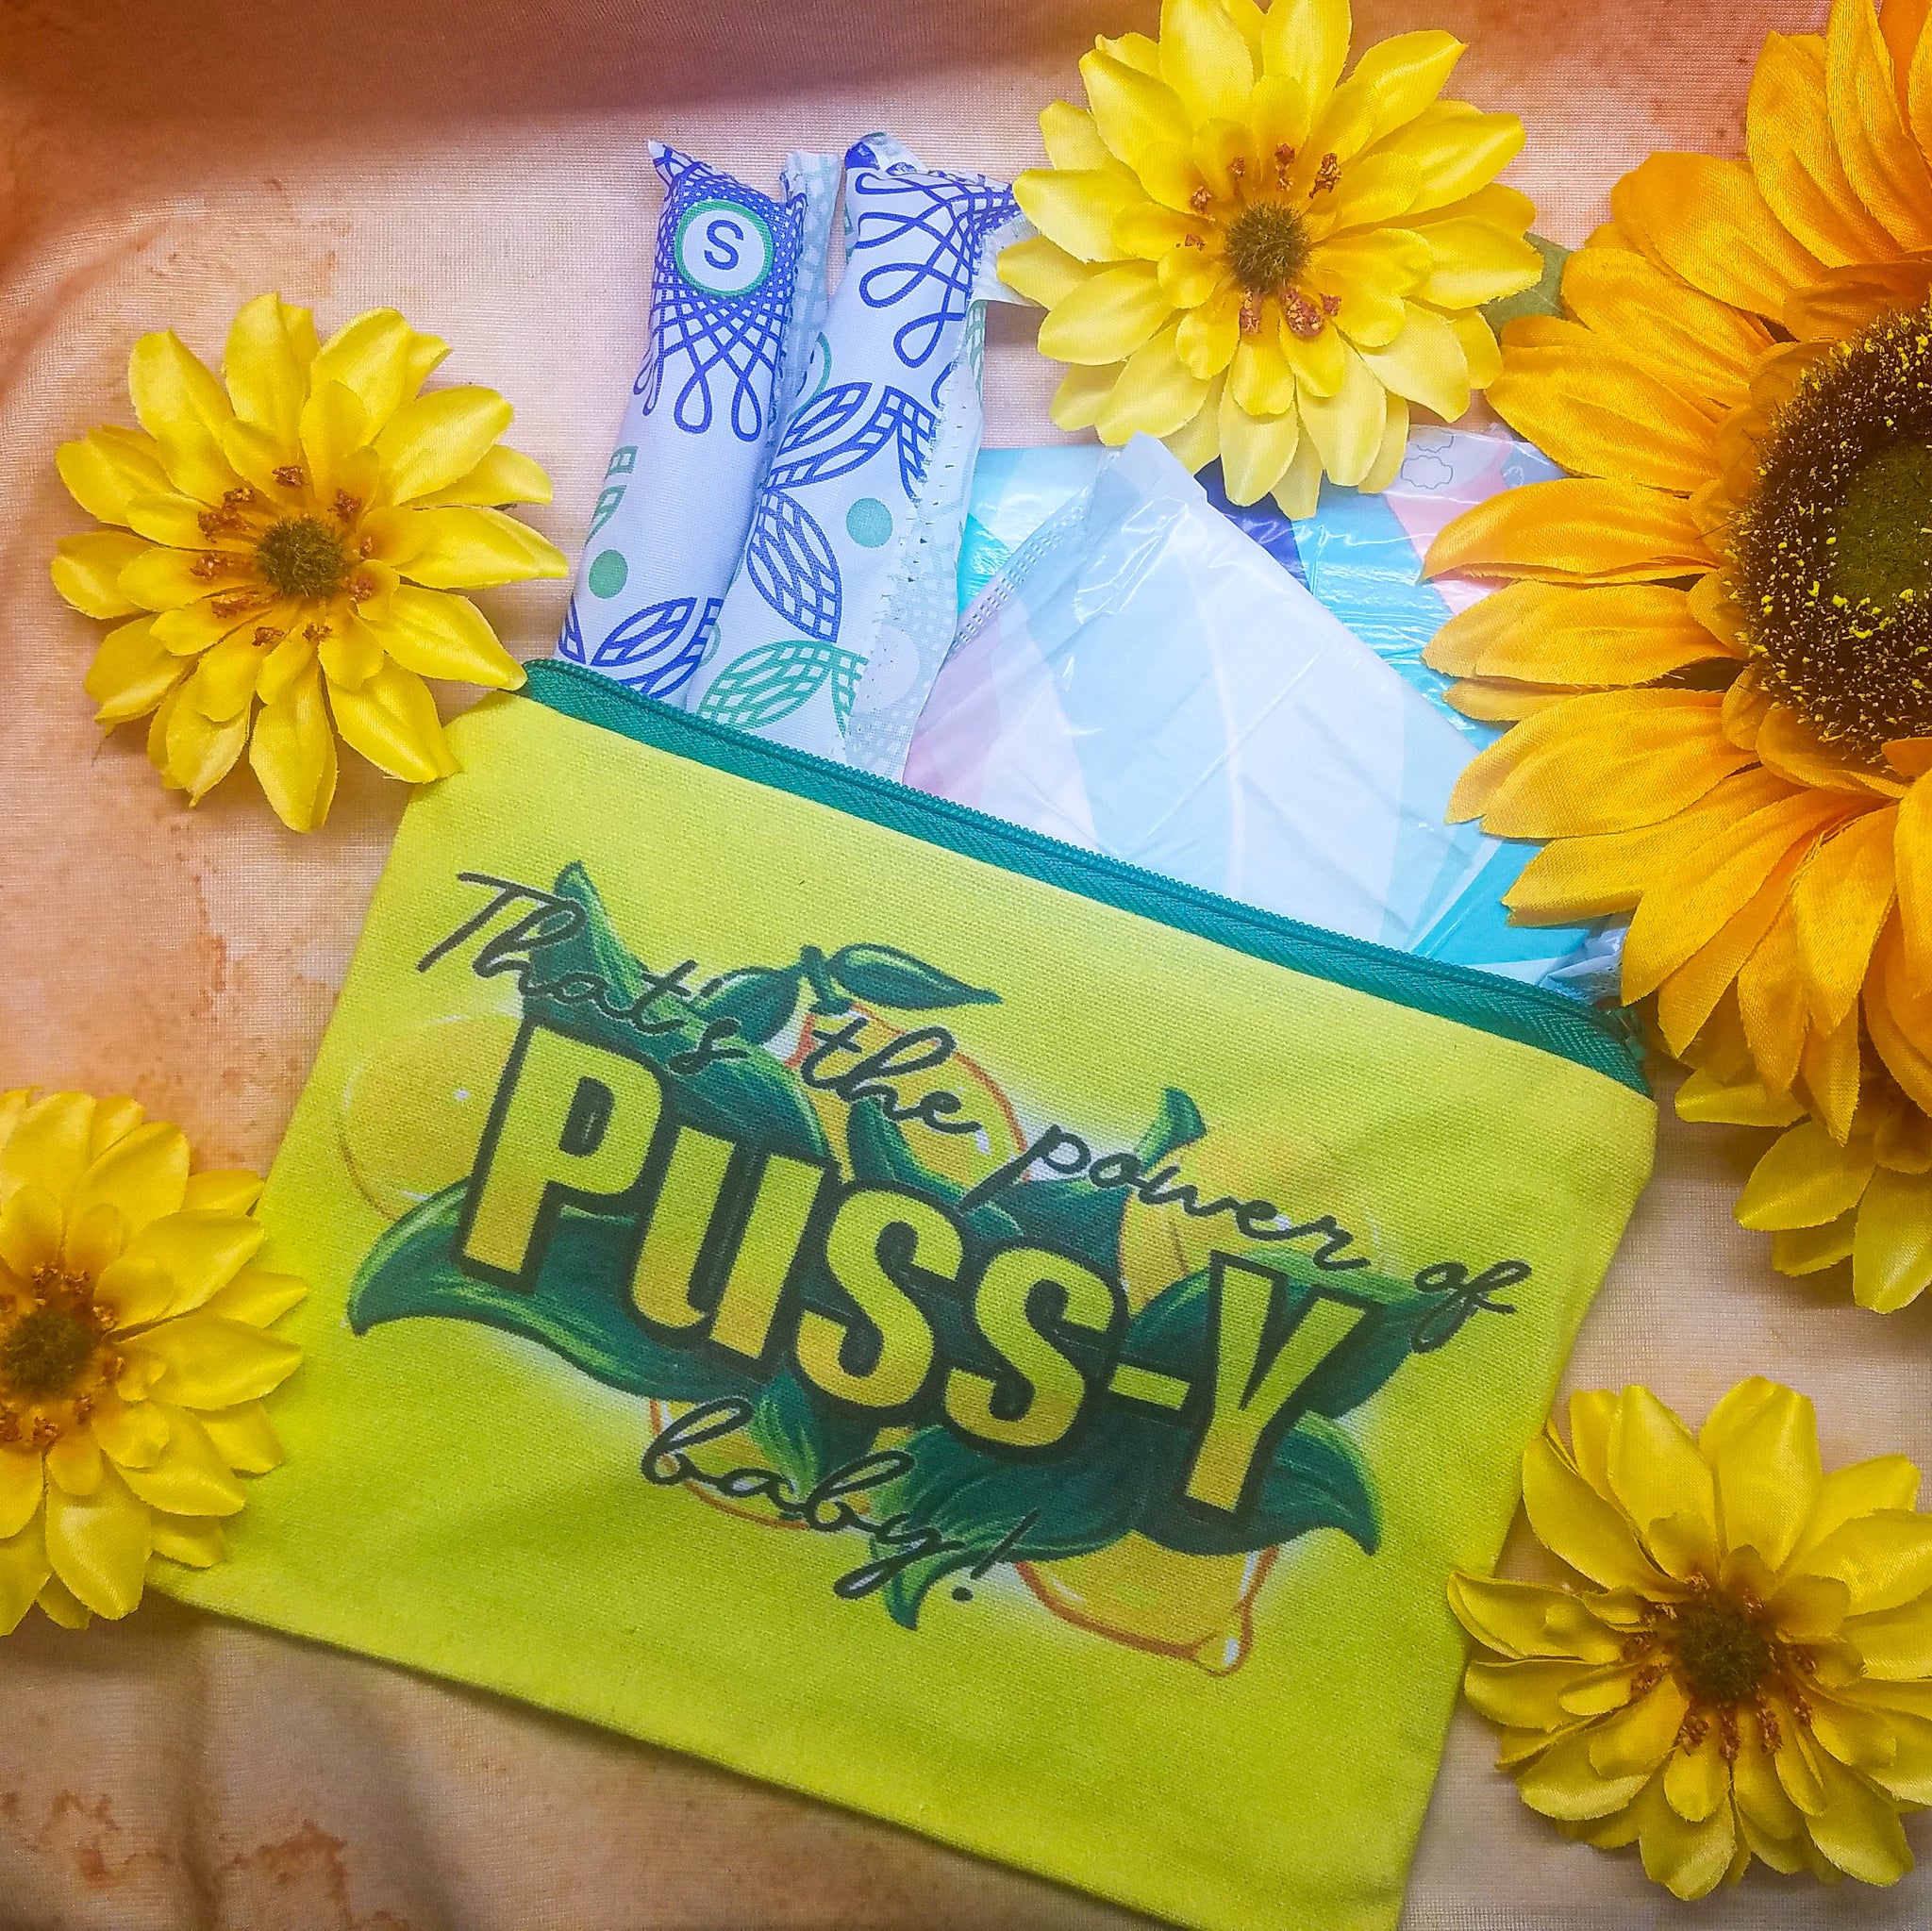 Power of P*ssy Period Sex Toy Pouch